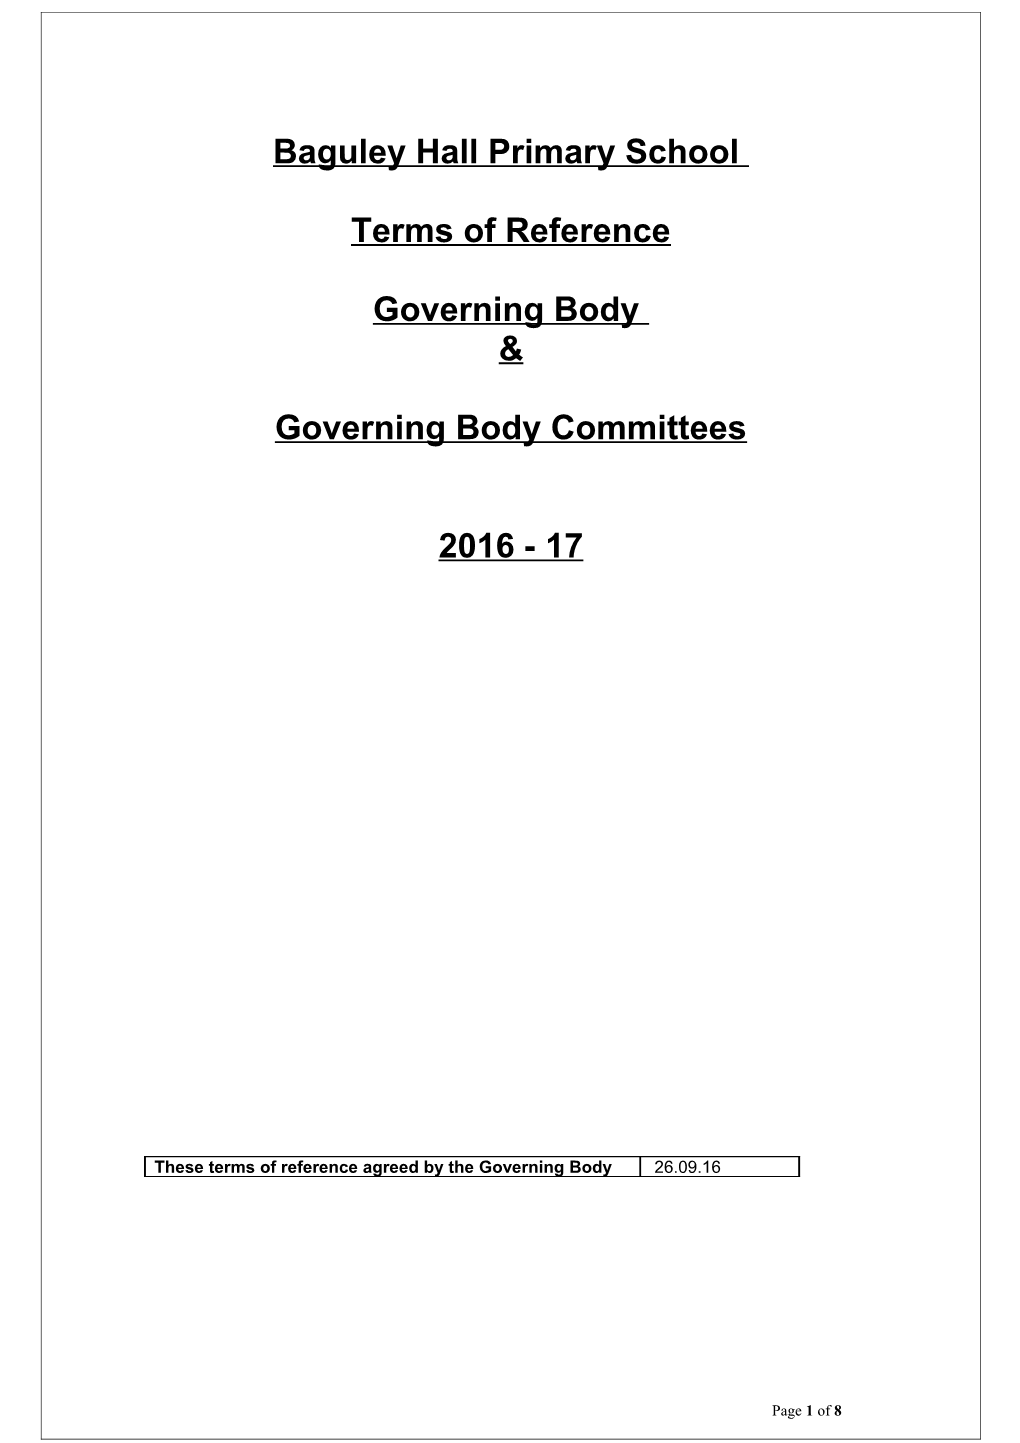 The Role of the Chair of the Governing Body